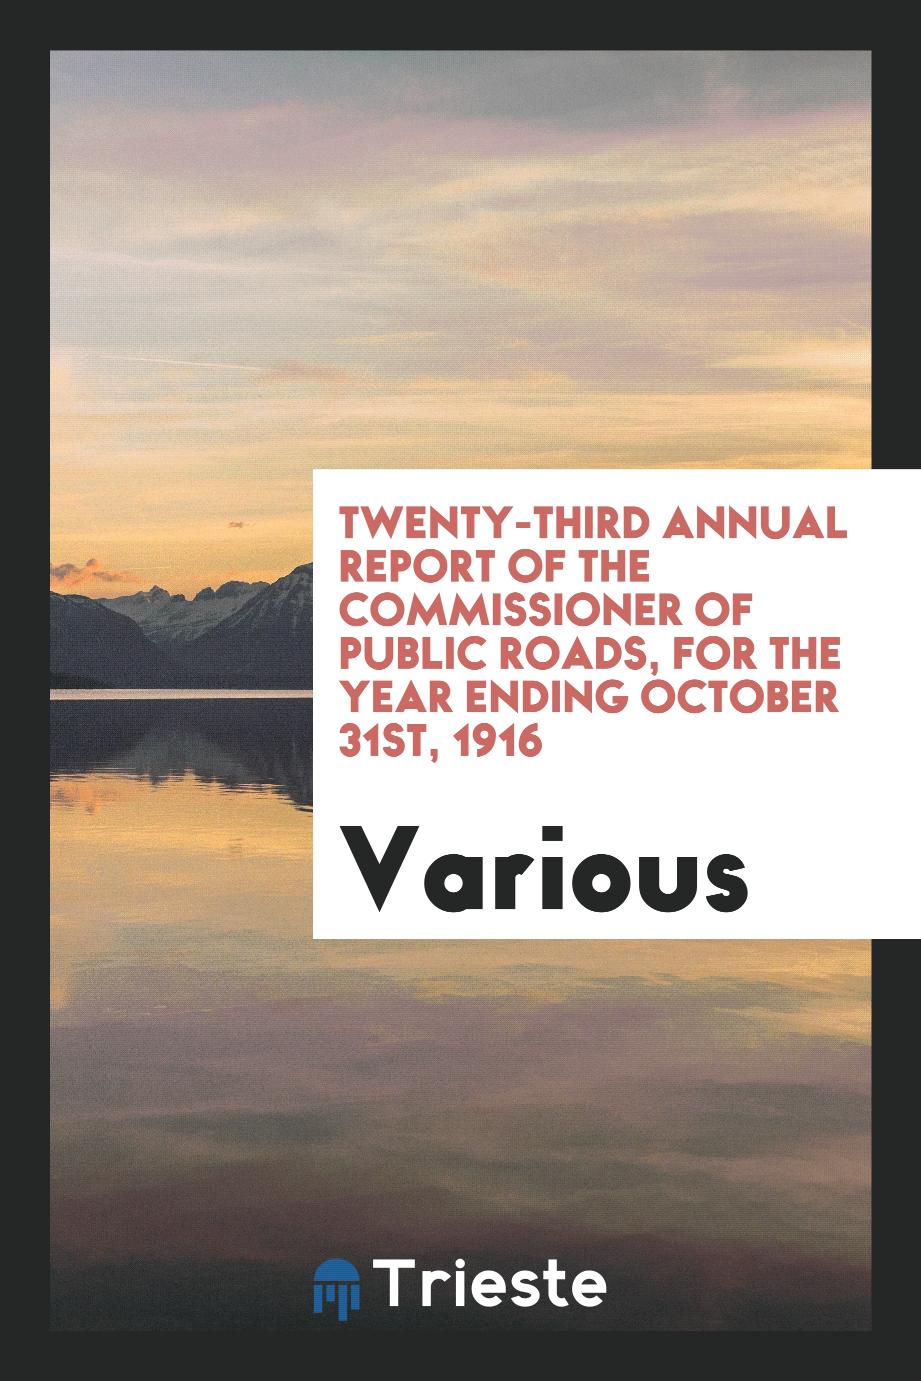 Twenty-Third Annual Report of the Commissioner of Public Roads, for the Year Ending October 31st, 1916